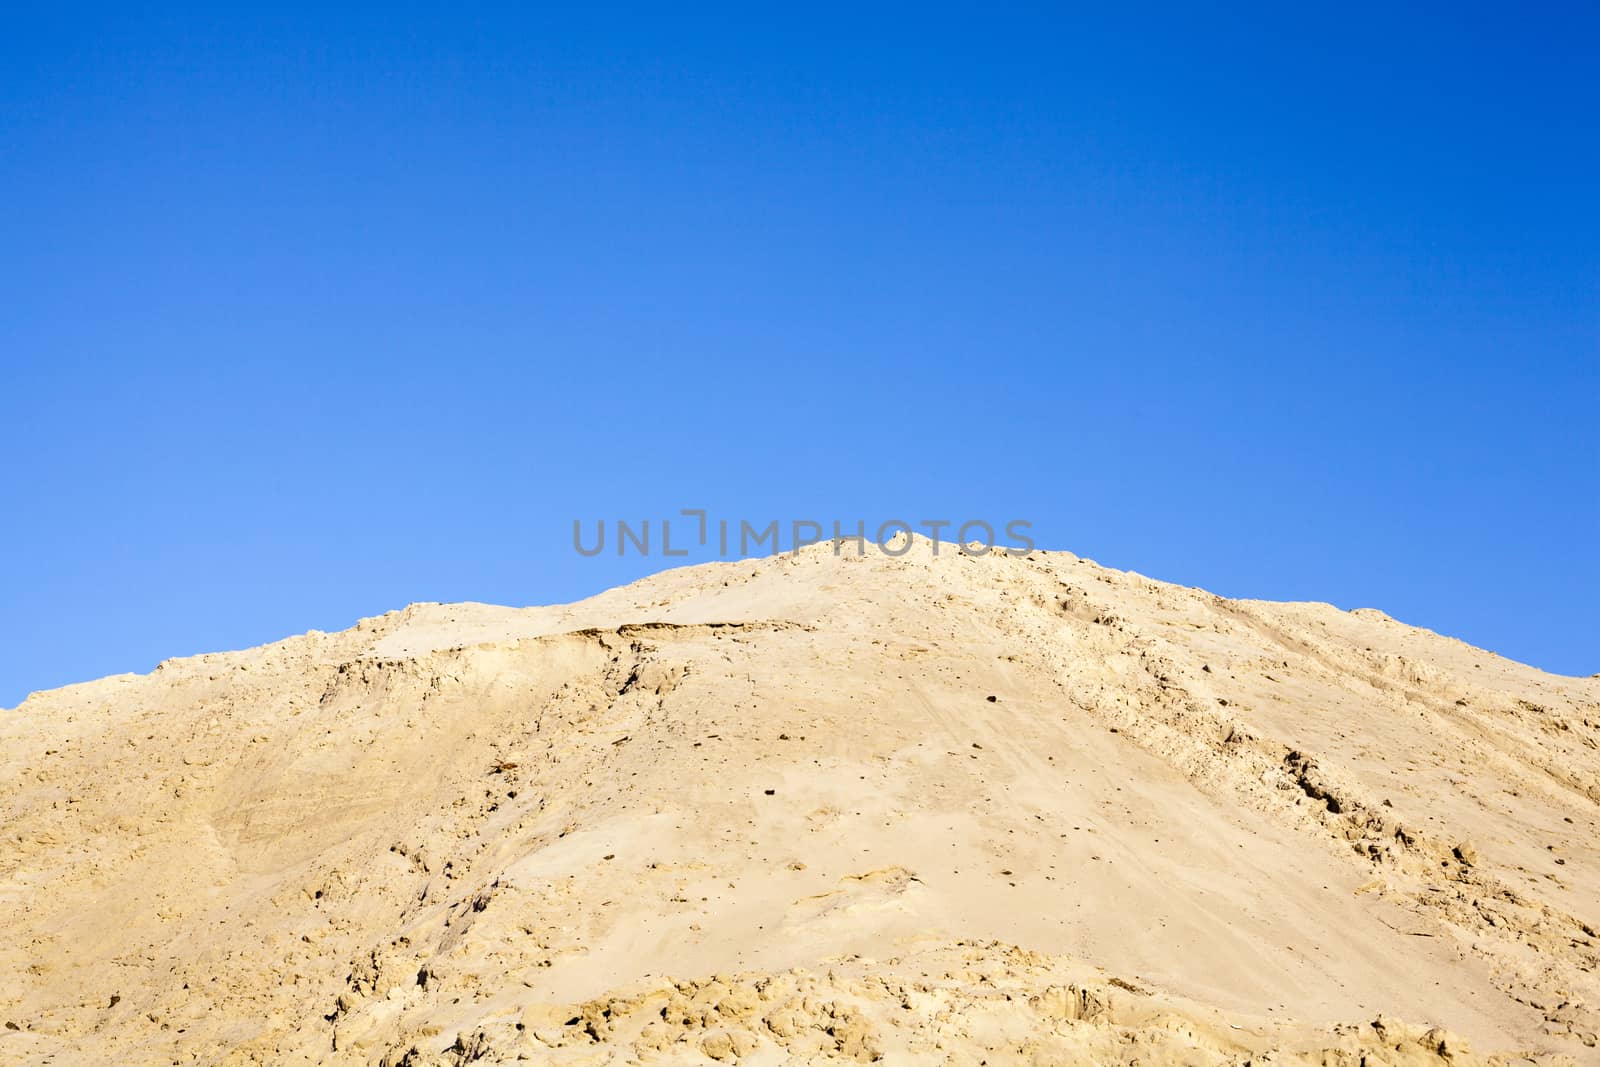 Pile of sand and clear blue sky over it.